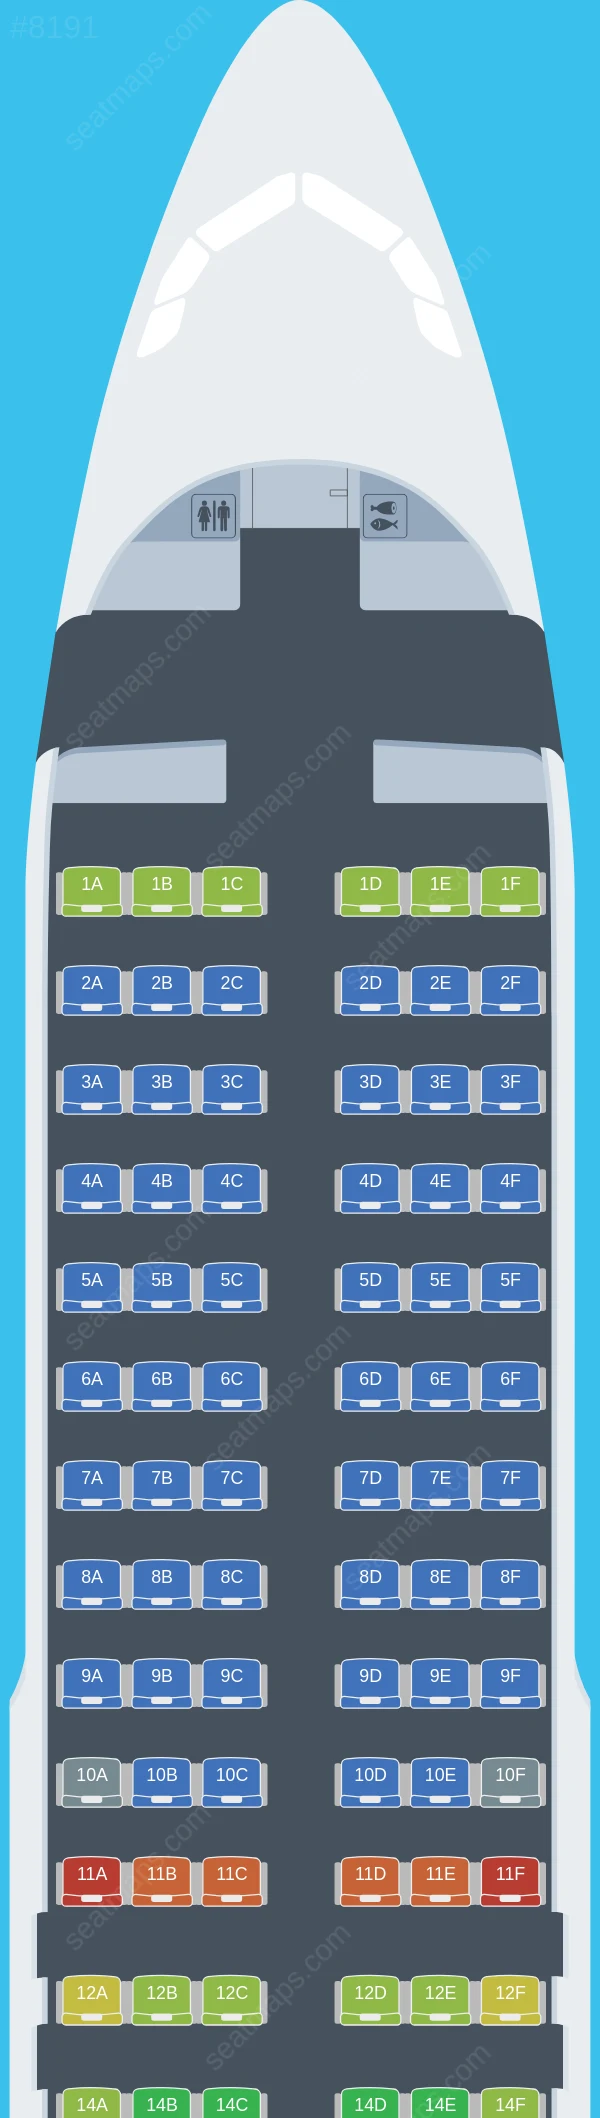 JetSMART Airbus A320-200 seatmap preview